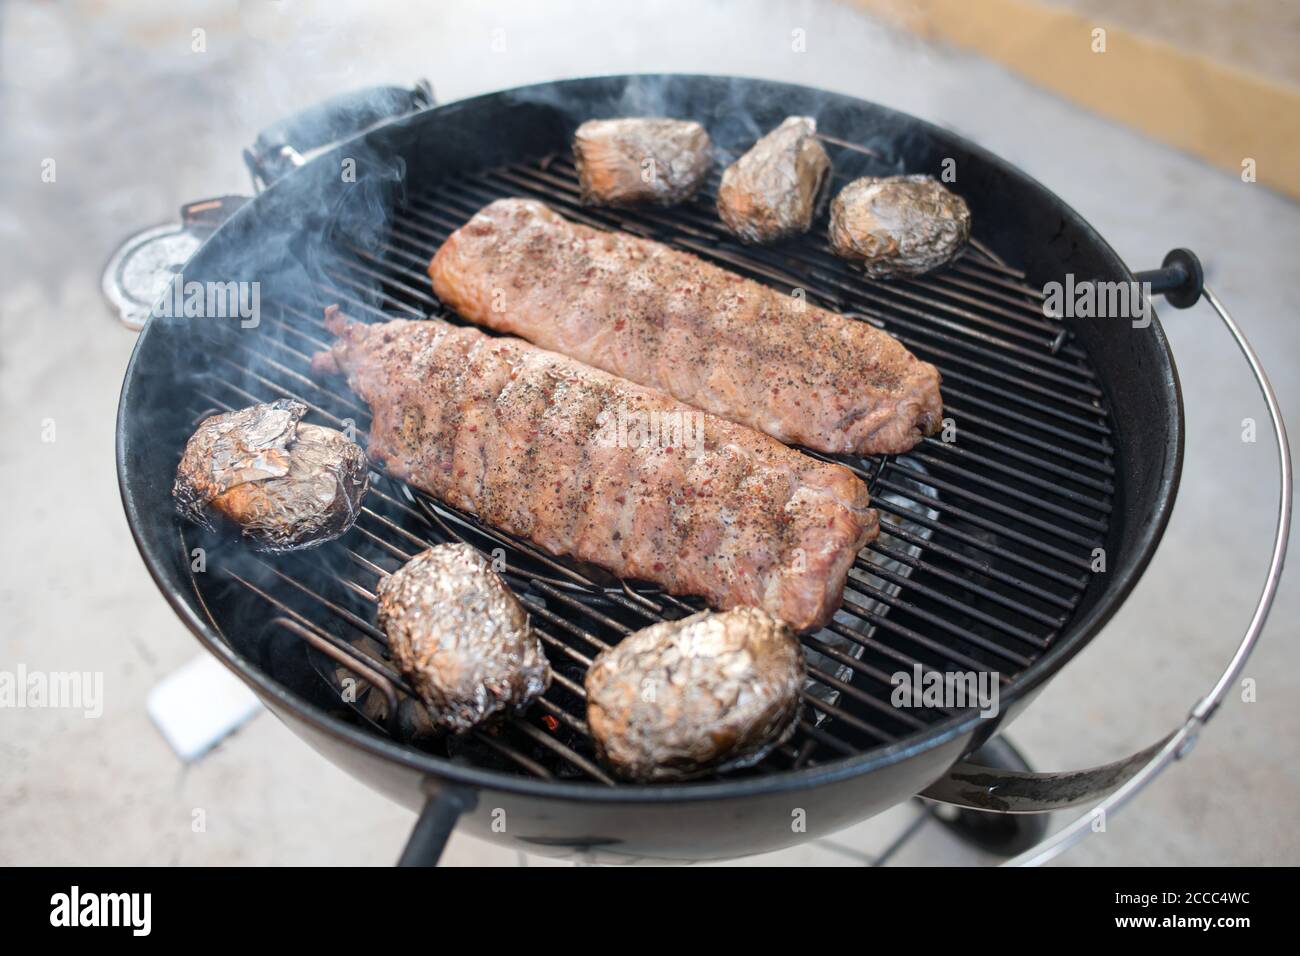 Delicious Juicy Meat with Spices Cooked on the Charcoal Grill. Stock Photo  - Image of appetizing, closeup: 129179030